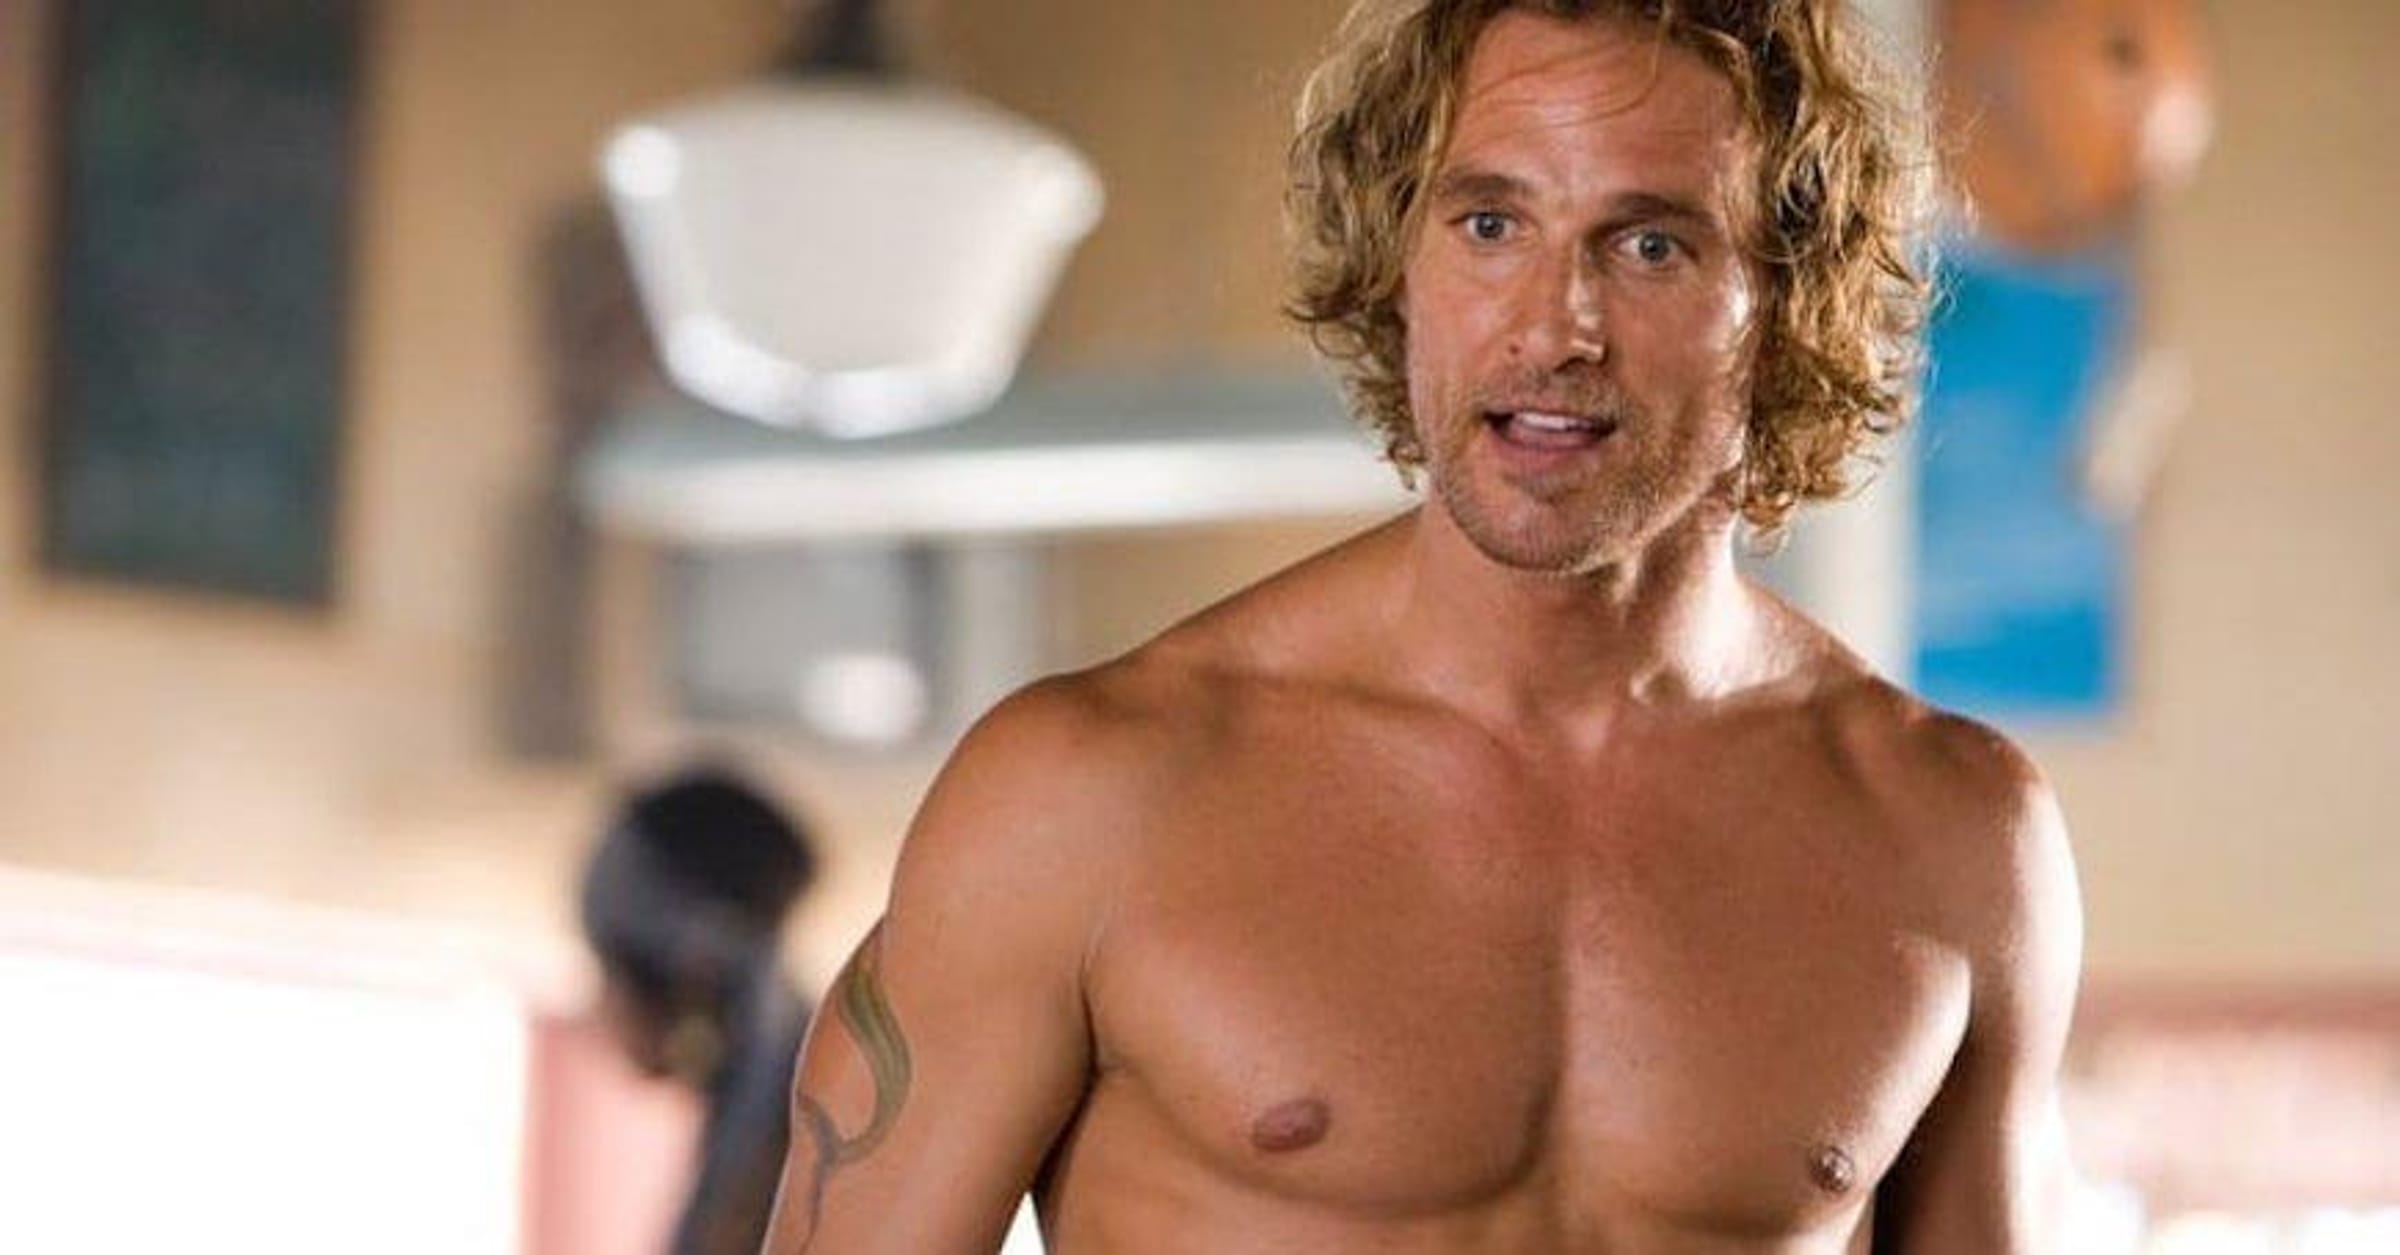 Hot guys: Men who lost their shirts